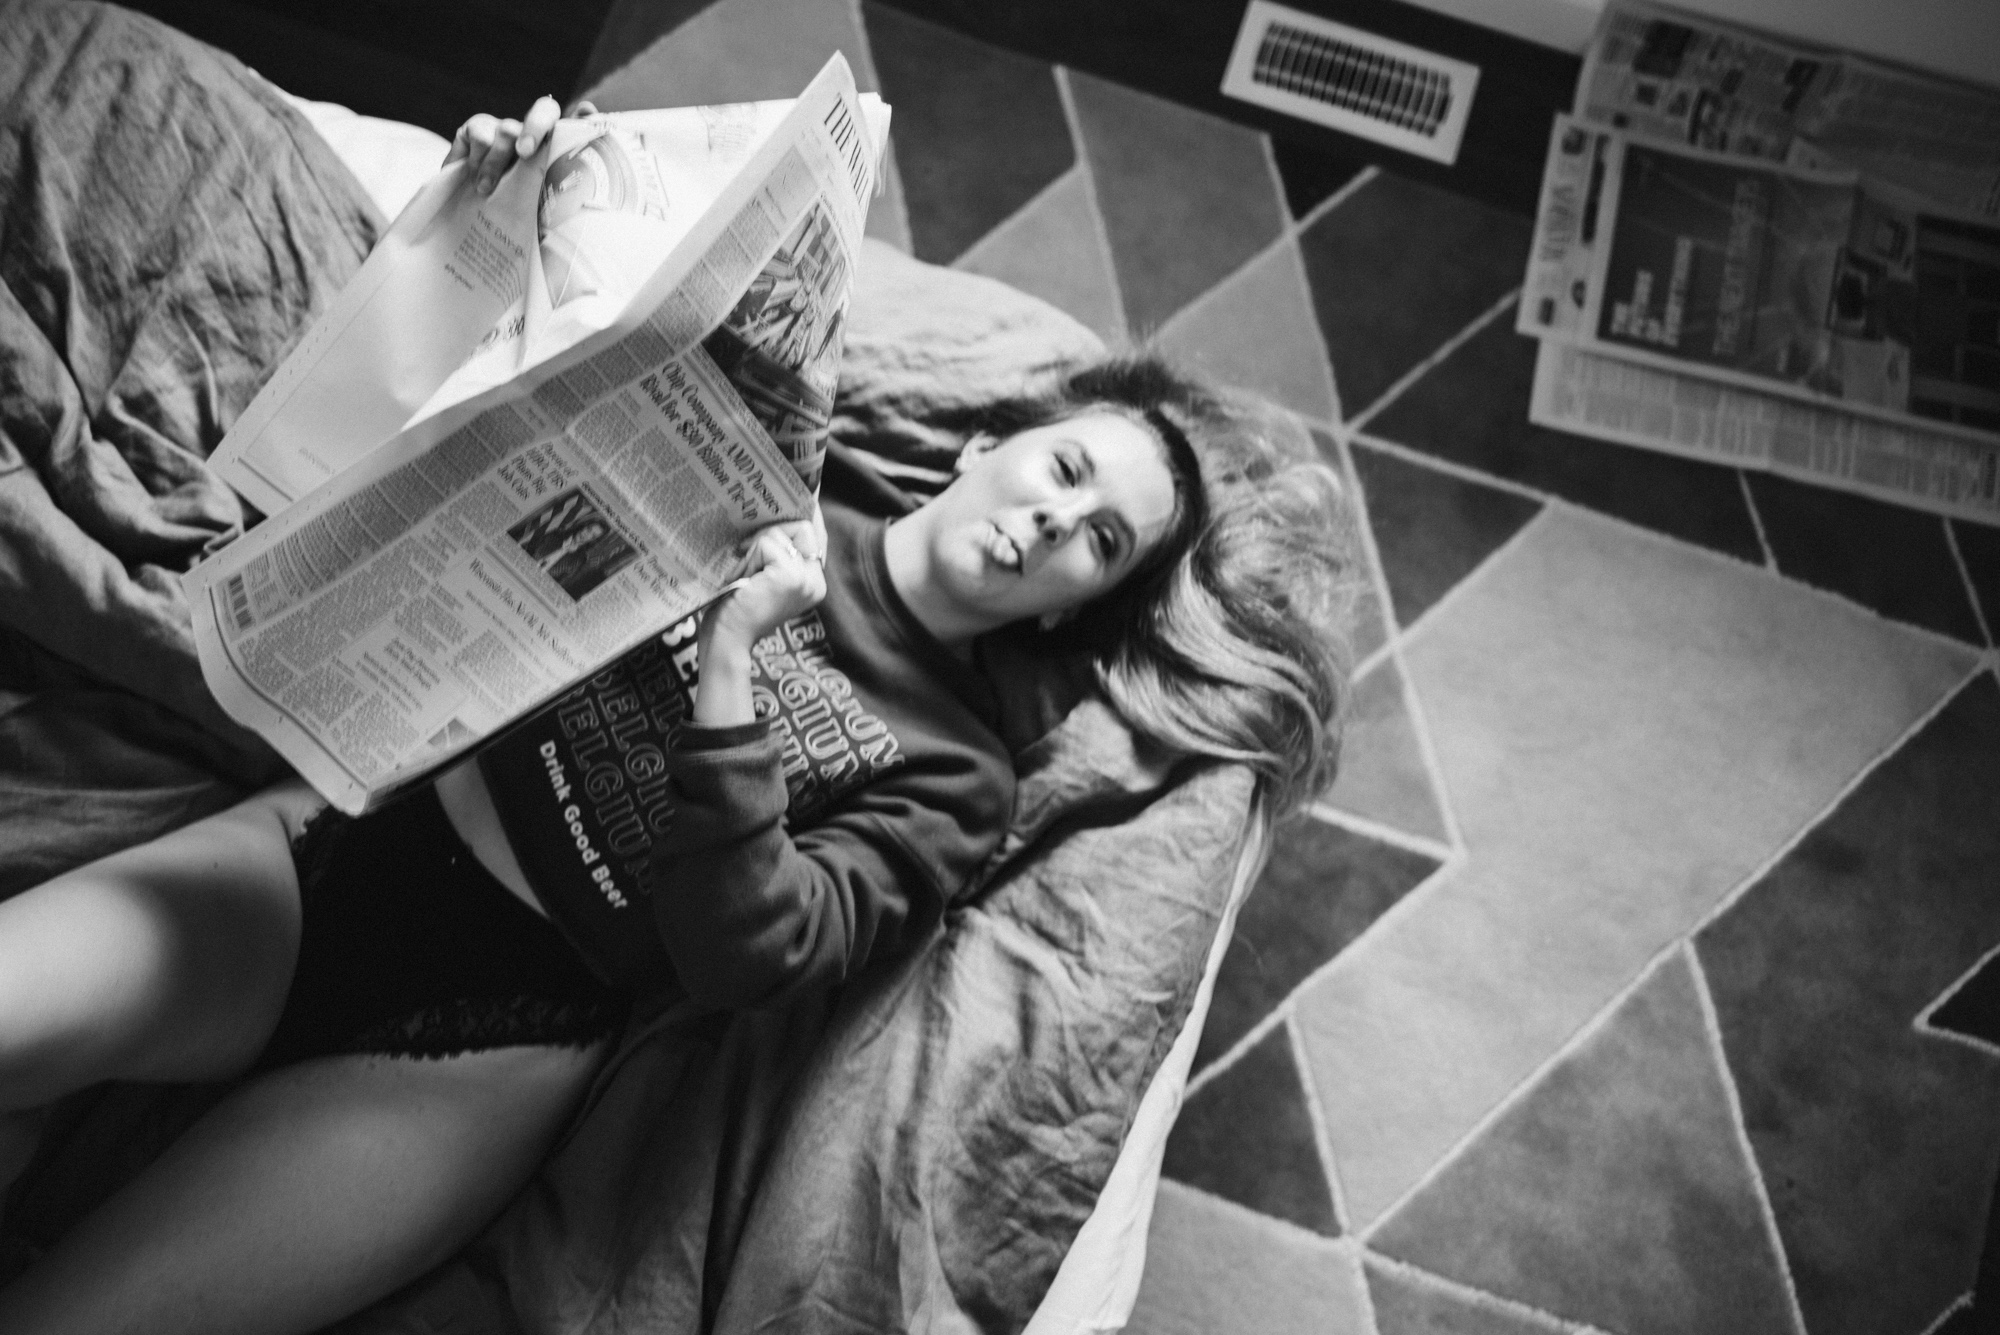 Clair Tillotson laying on the floor reading a newspaper